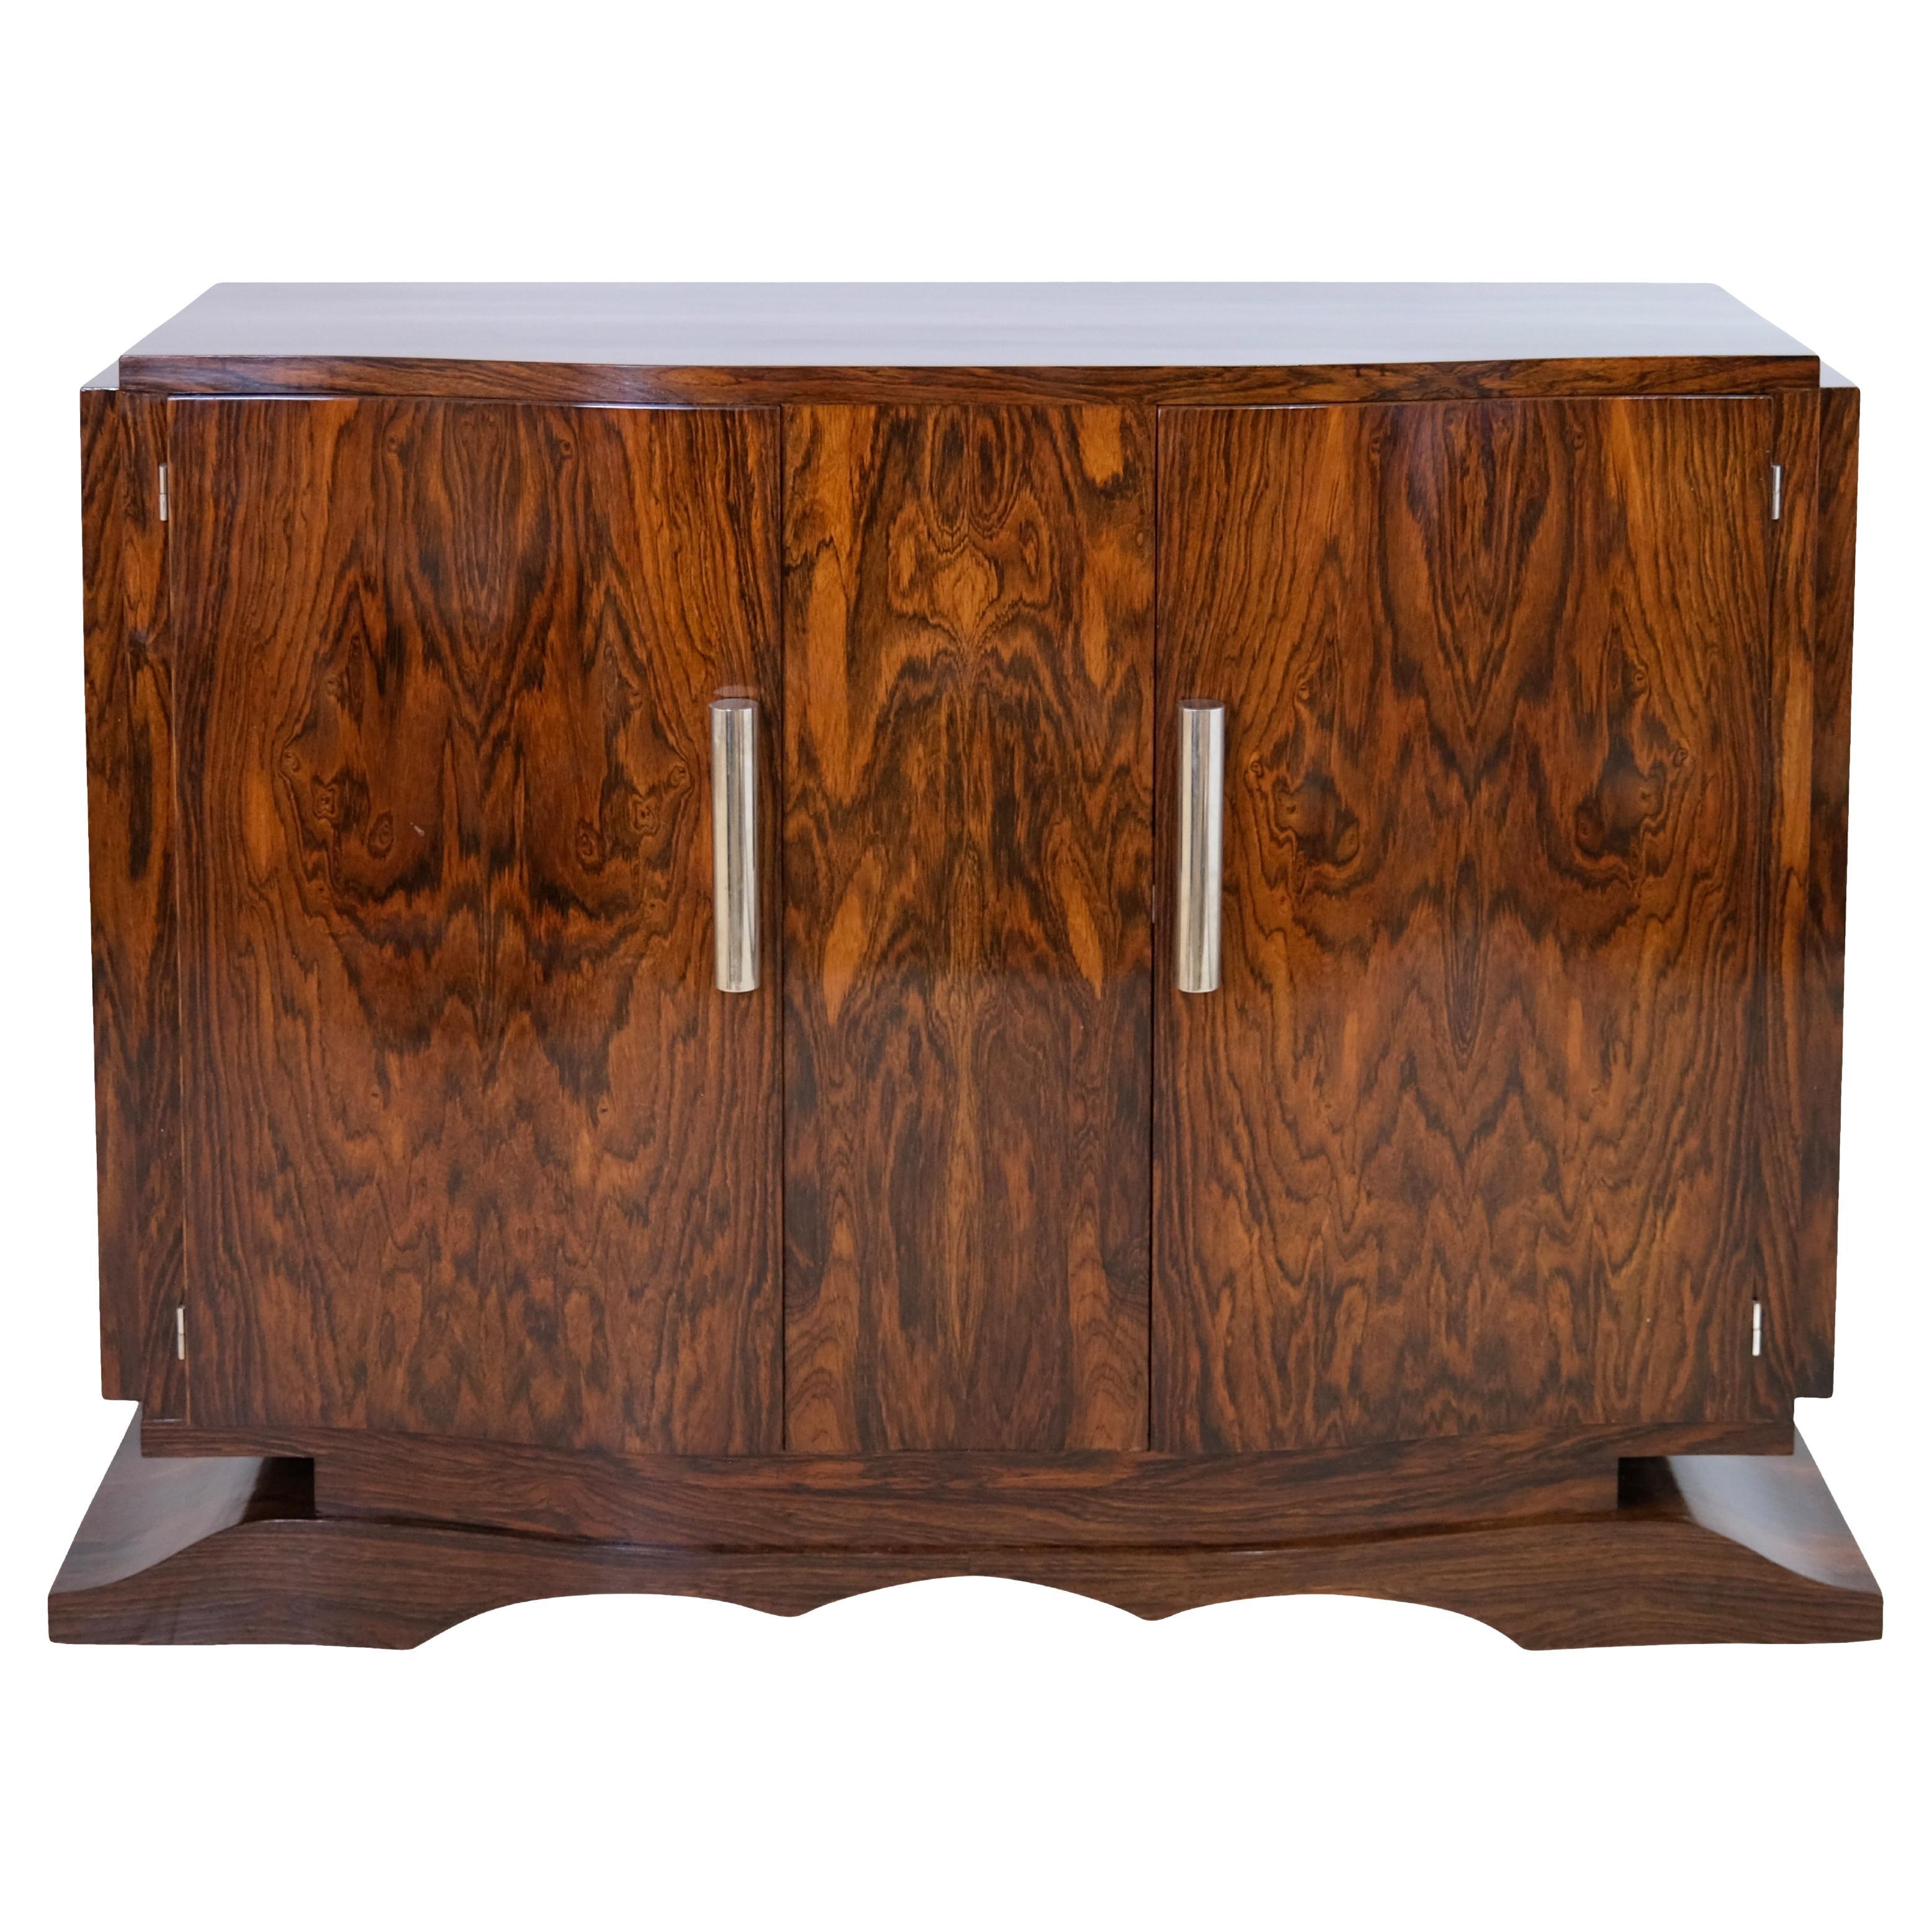 1930s French Art Deco Sideboard in Caucasian Nutwood with Sliding Fittings For Sale